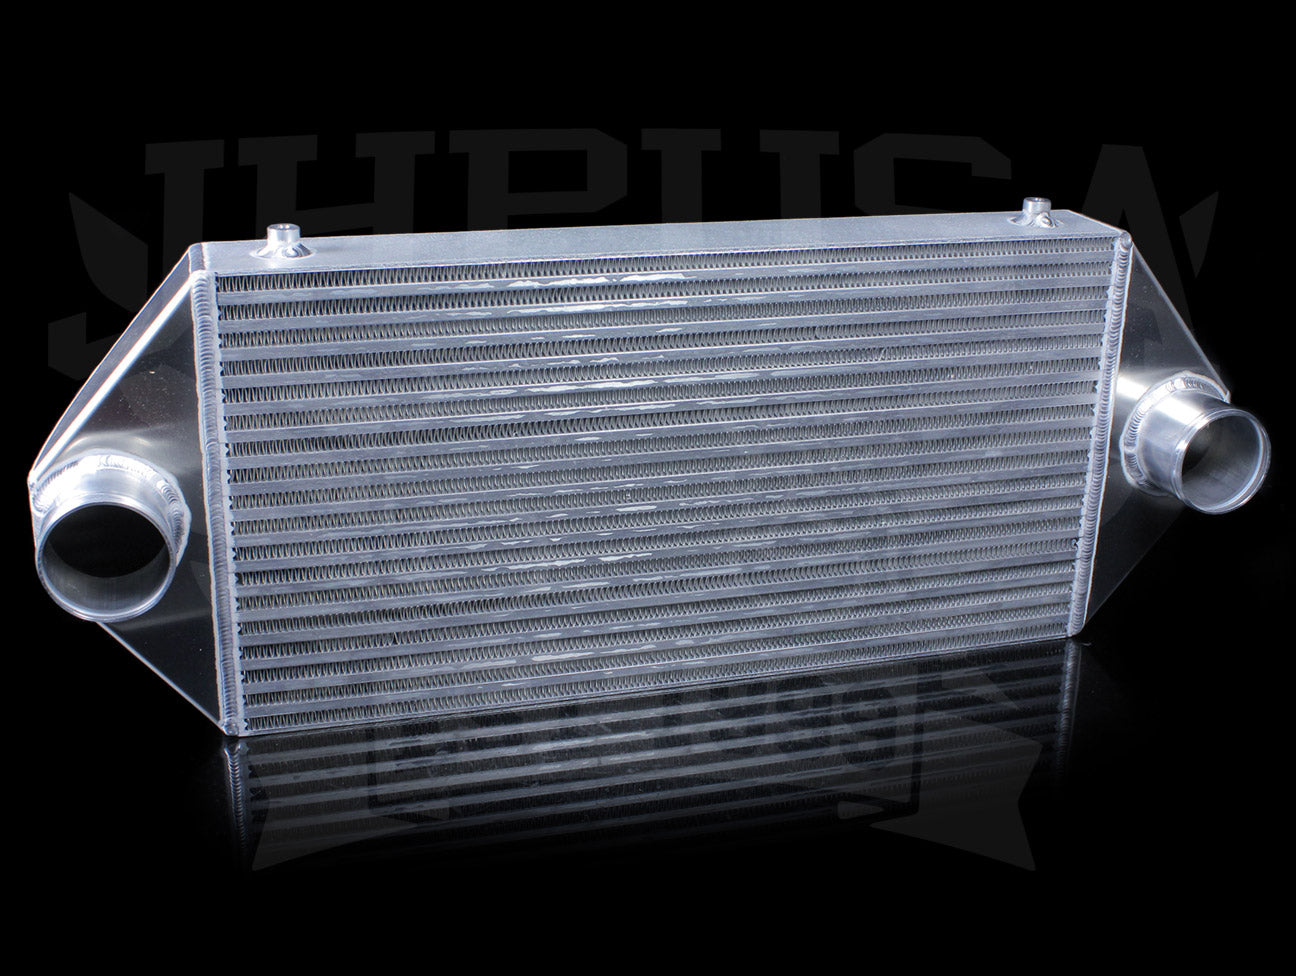 SpeedFactory Racing "Street" Side Inlet/Outlet Universal Front Mount Intercooler - 2.5" Inlet / 2.5" Outlet (300HP-500HP)